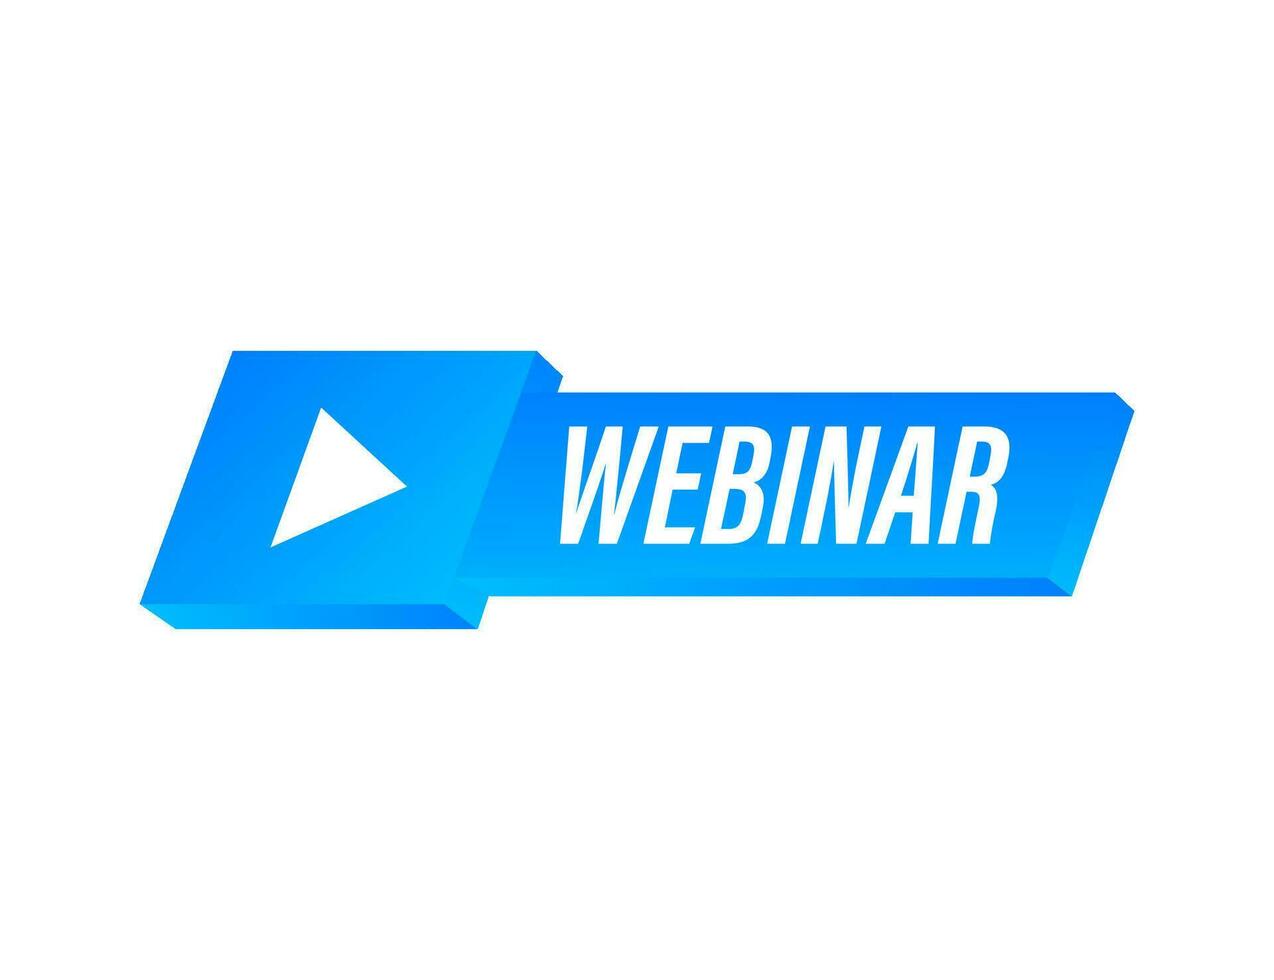 Webinar Icon, flat design style with blue play button. Vector illustration